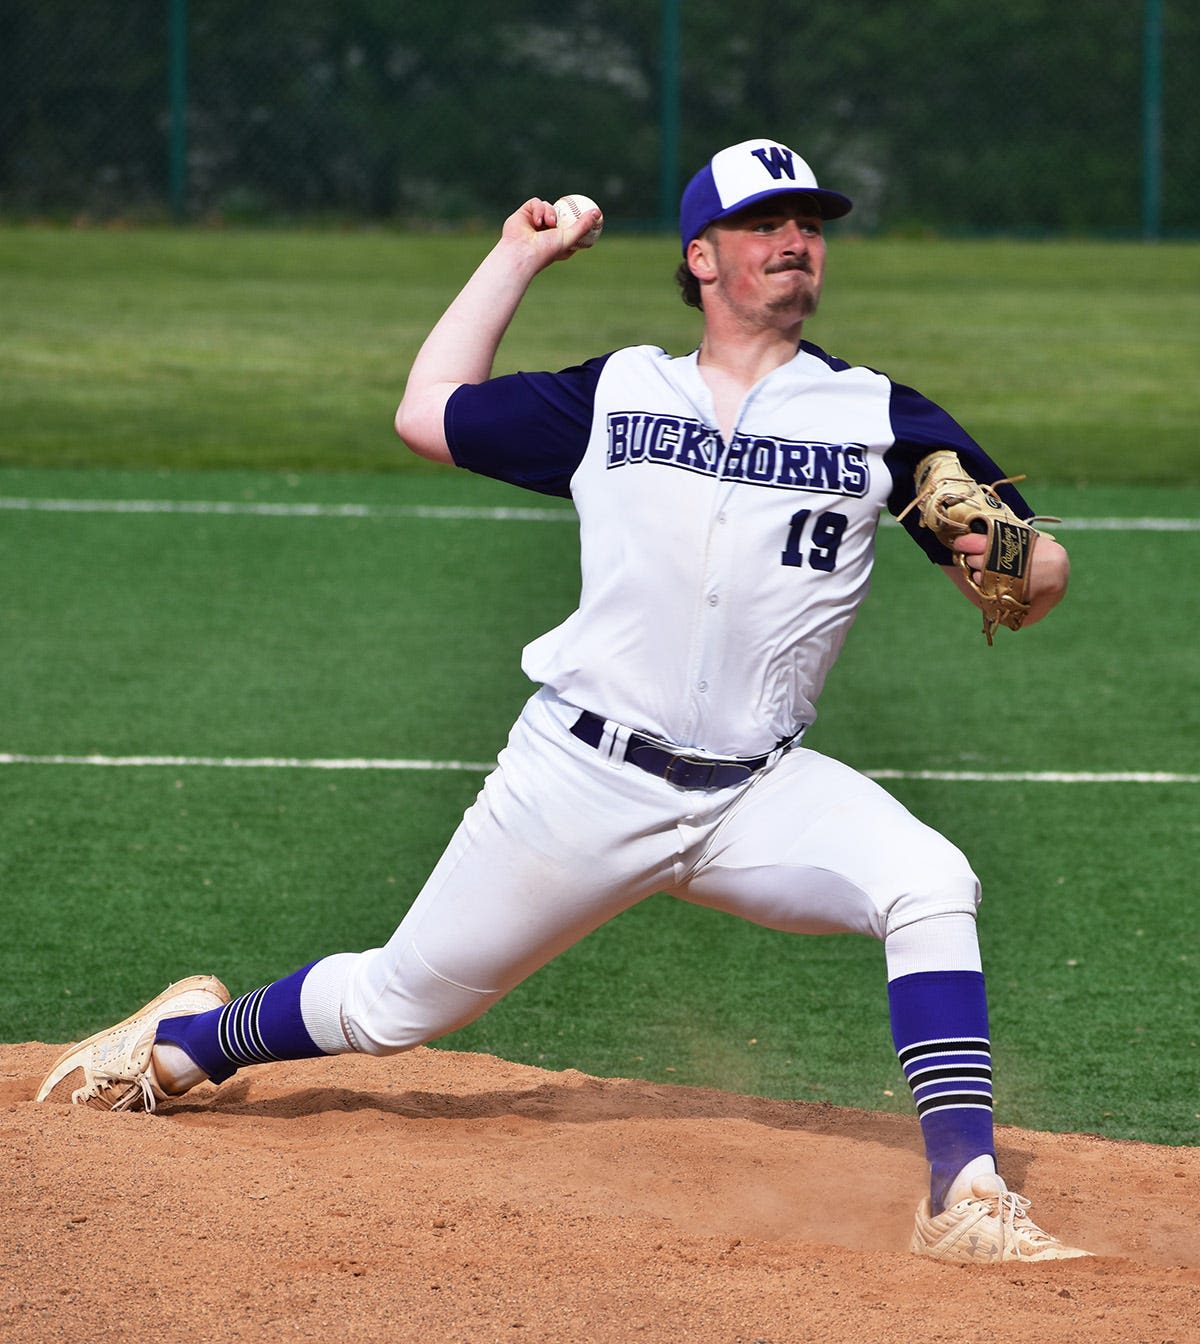 Wallenpaupack Area baseball team is in a three-way battle for first place in Division I